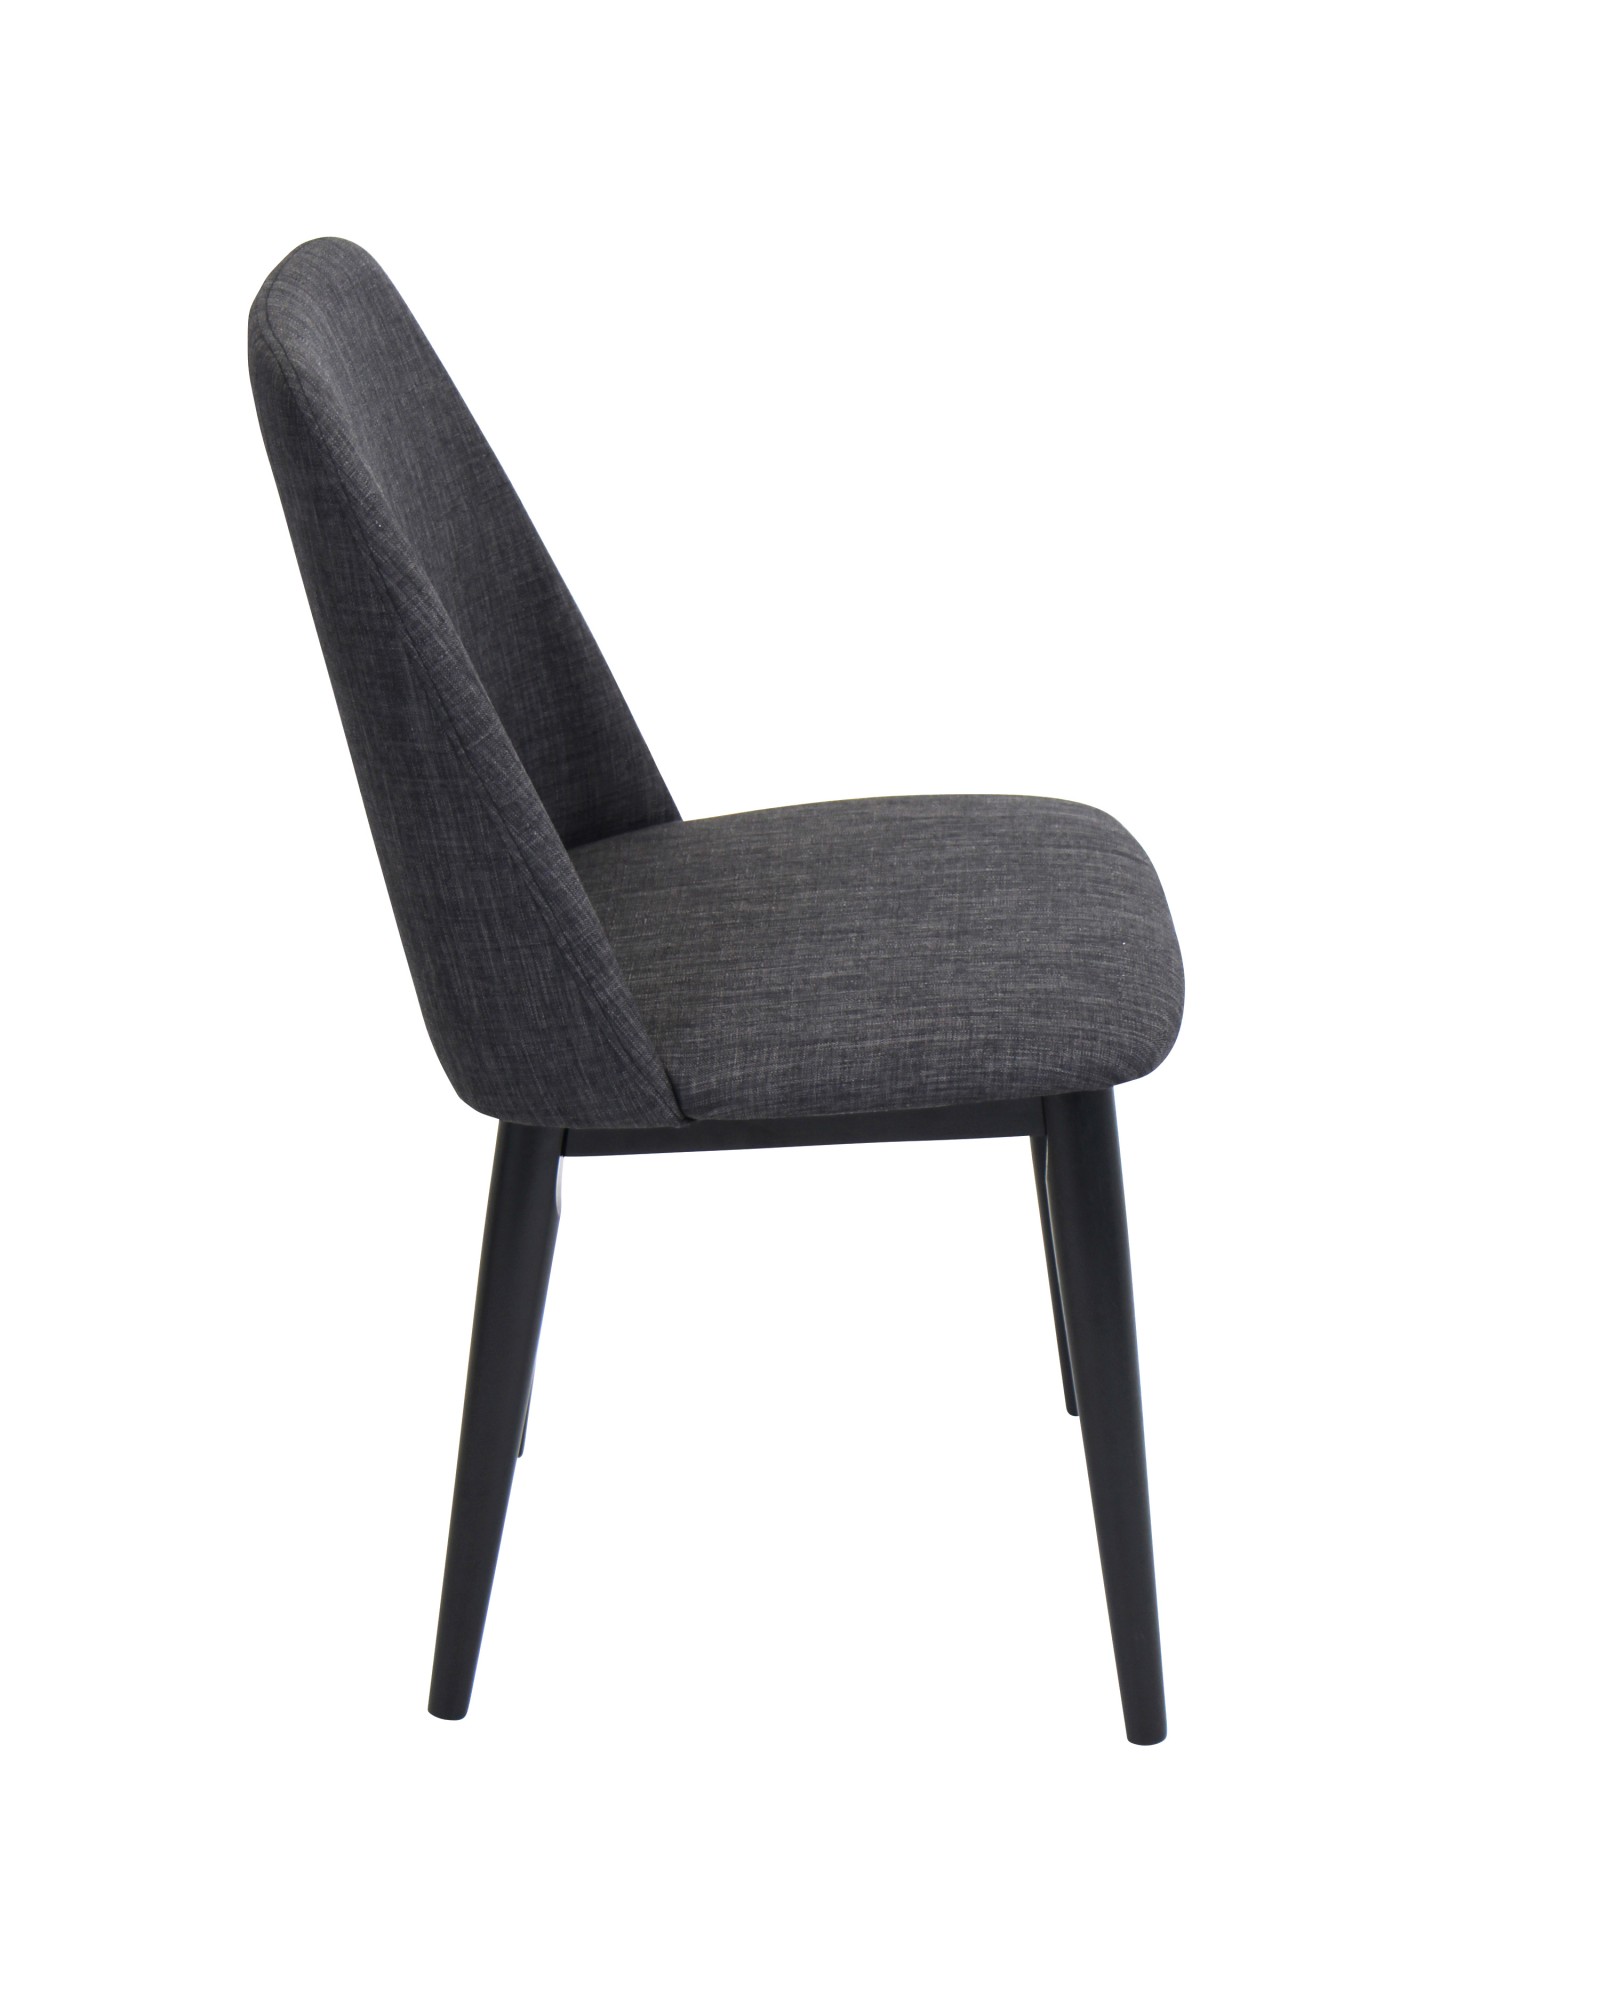 Tintori Contemporary Dining Chair in Charcoal Fabric - Set of 2